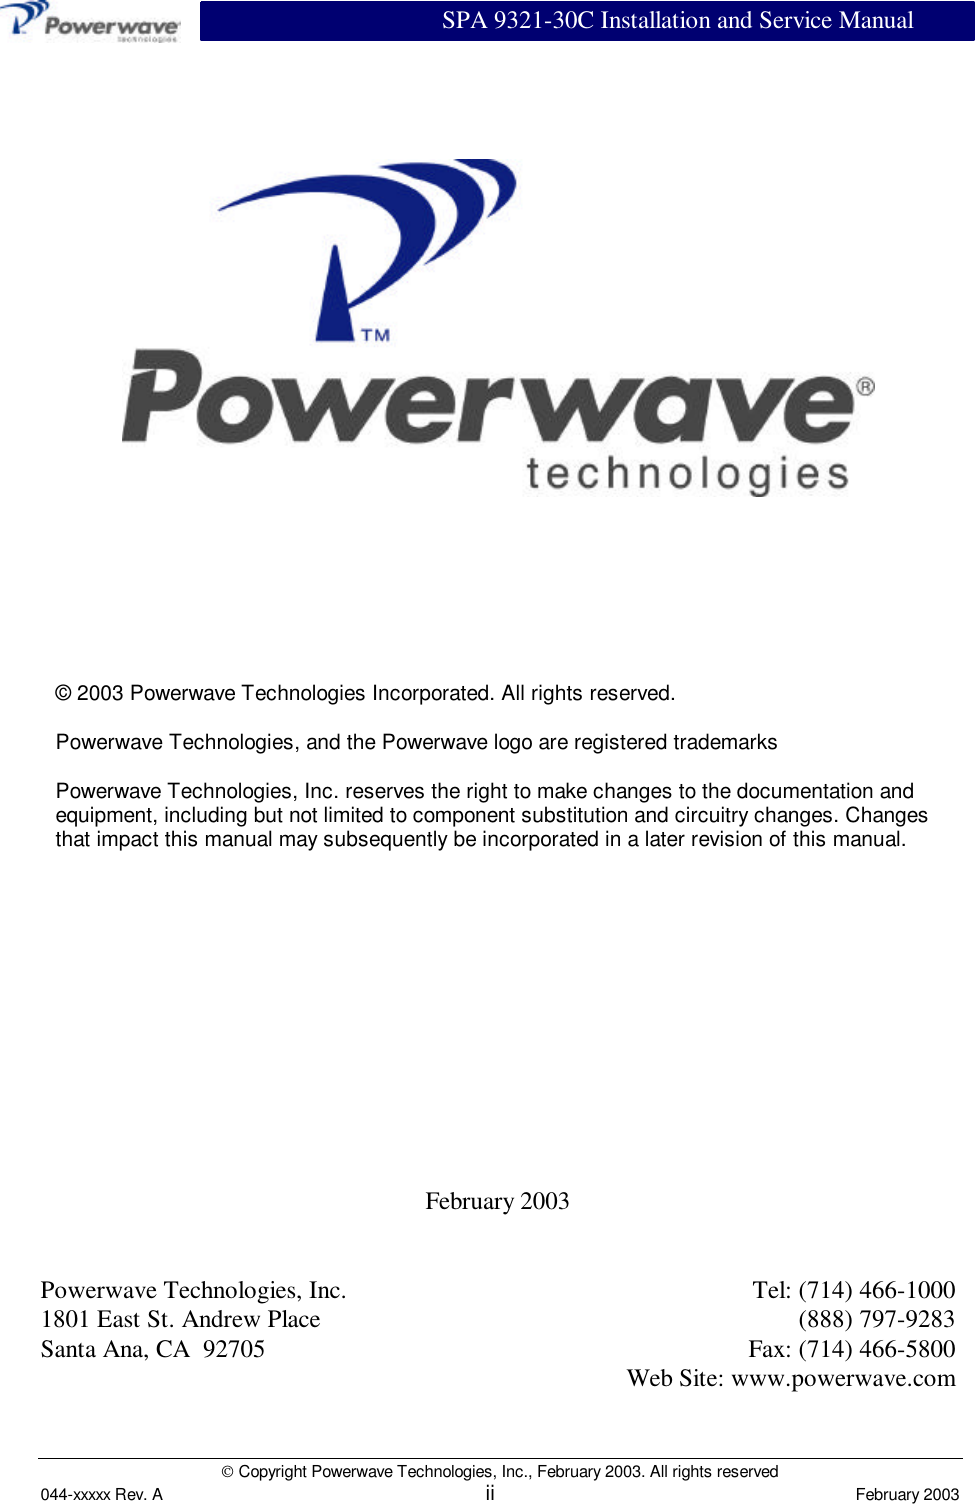                          SPA 9321-30C Installation and Service Manual Copyright Powerwave Technologies, Inc., February 2003. All rights reserved044-xxxxx Rev. A ii February 2003February 2003Powerwave Technologies, Inc. Tel: (714) 466-10001801 East St. Andrew Place (888) 797-9283Santa Ana, CA  92705 Fax: (714) 466-5800Web Site: www.powerwave.com© 2003 Powerwave Technologies Incorporated. All rights reserved.Powerwave Technologies, and the Powerwave logo are registered trademarksPowerwave Technologies, Inc. reserves the right to make changes to the documentation andequipment, including but not limited to component substitution and circuitry changes. Changesthat impact this manual may subsequently be incorporated in a later revision of this manual.